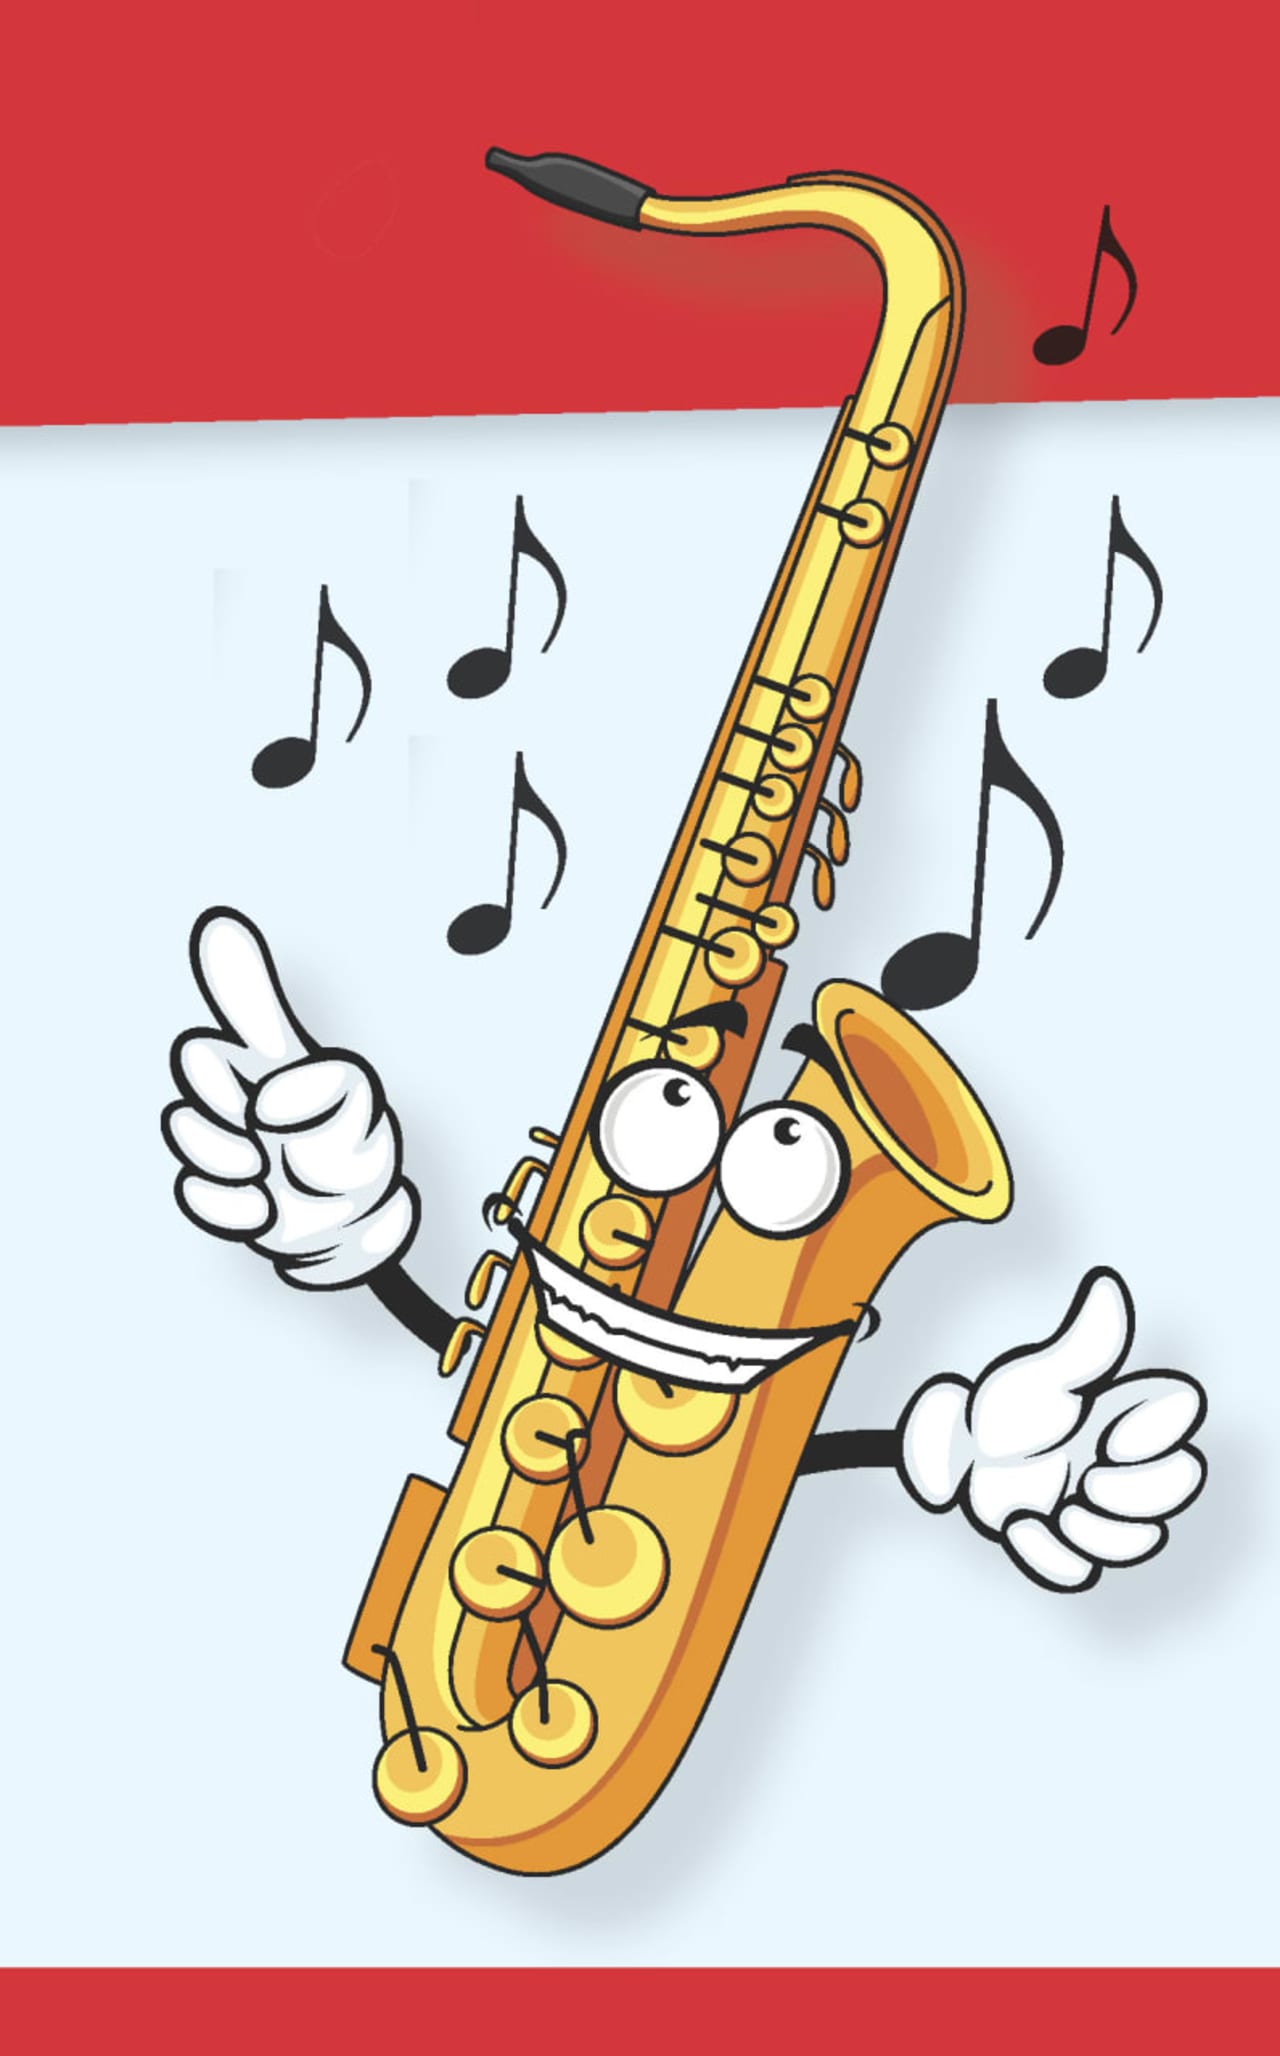 Scarsdale's, Hoff-Barthelson Music School will host a children’s concert, 'Breath in Motion – Wind Instruments Come to Life!,' on Friday, March 24.